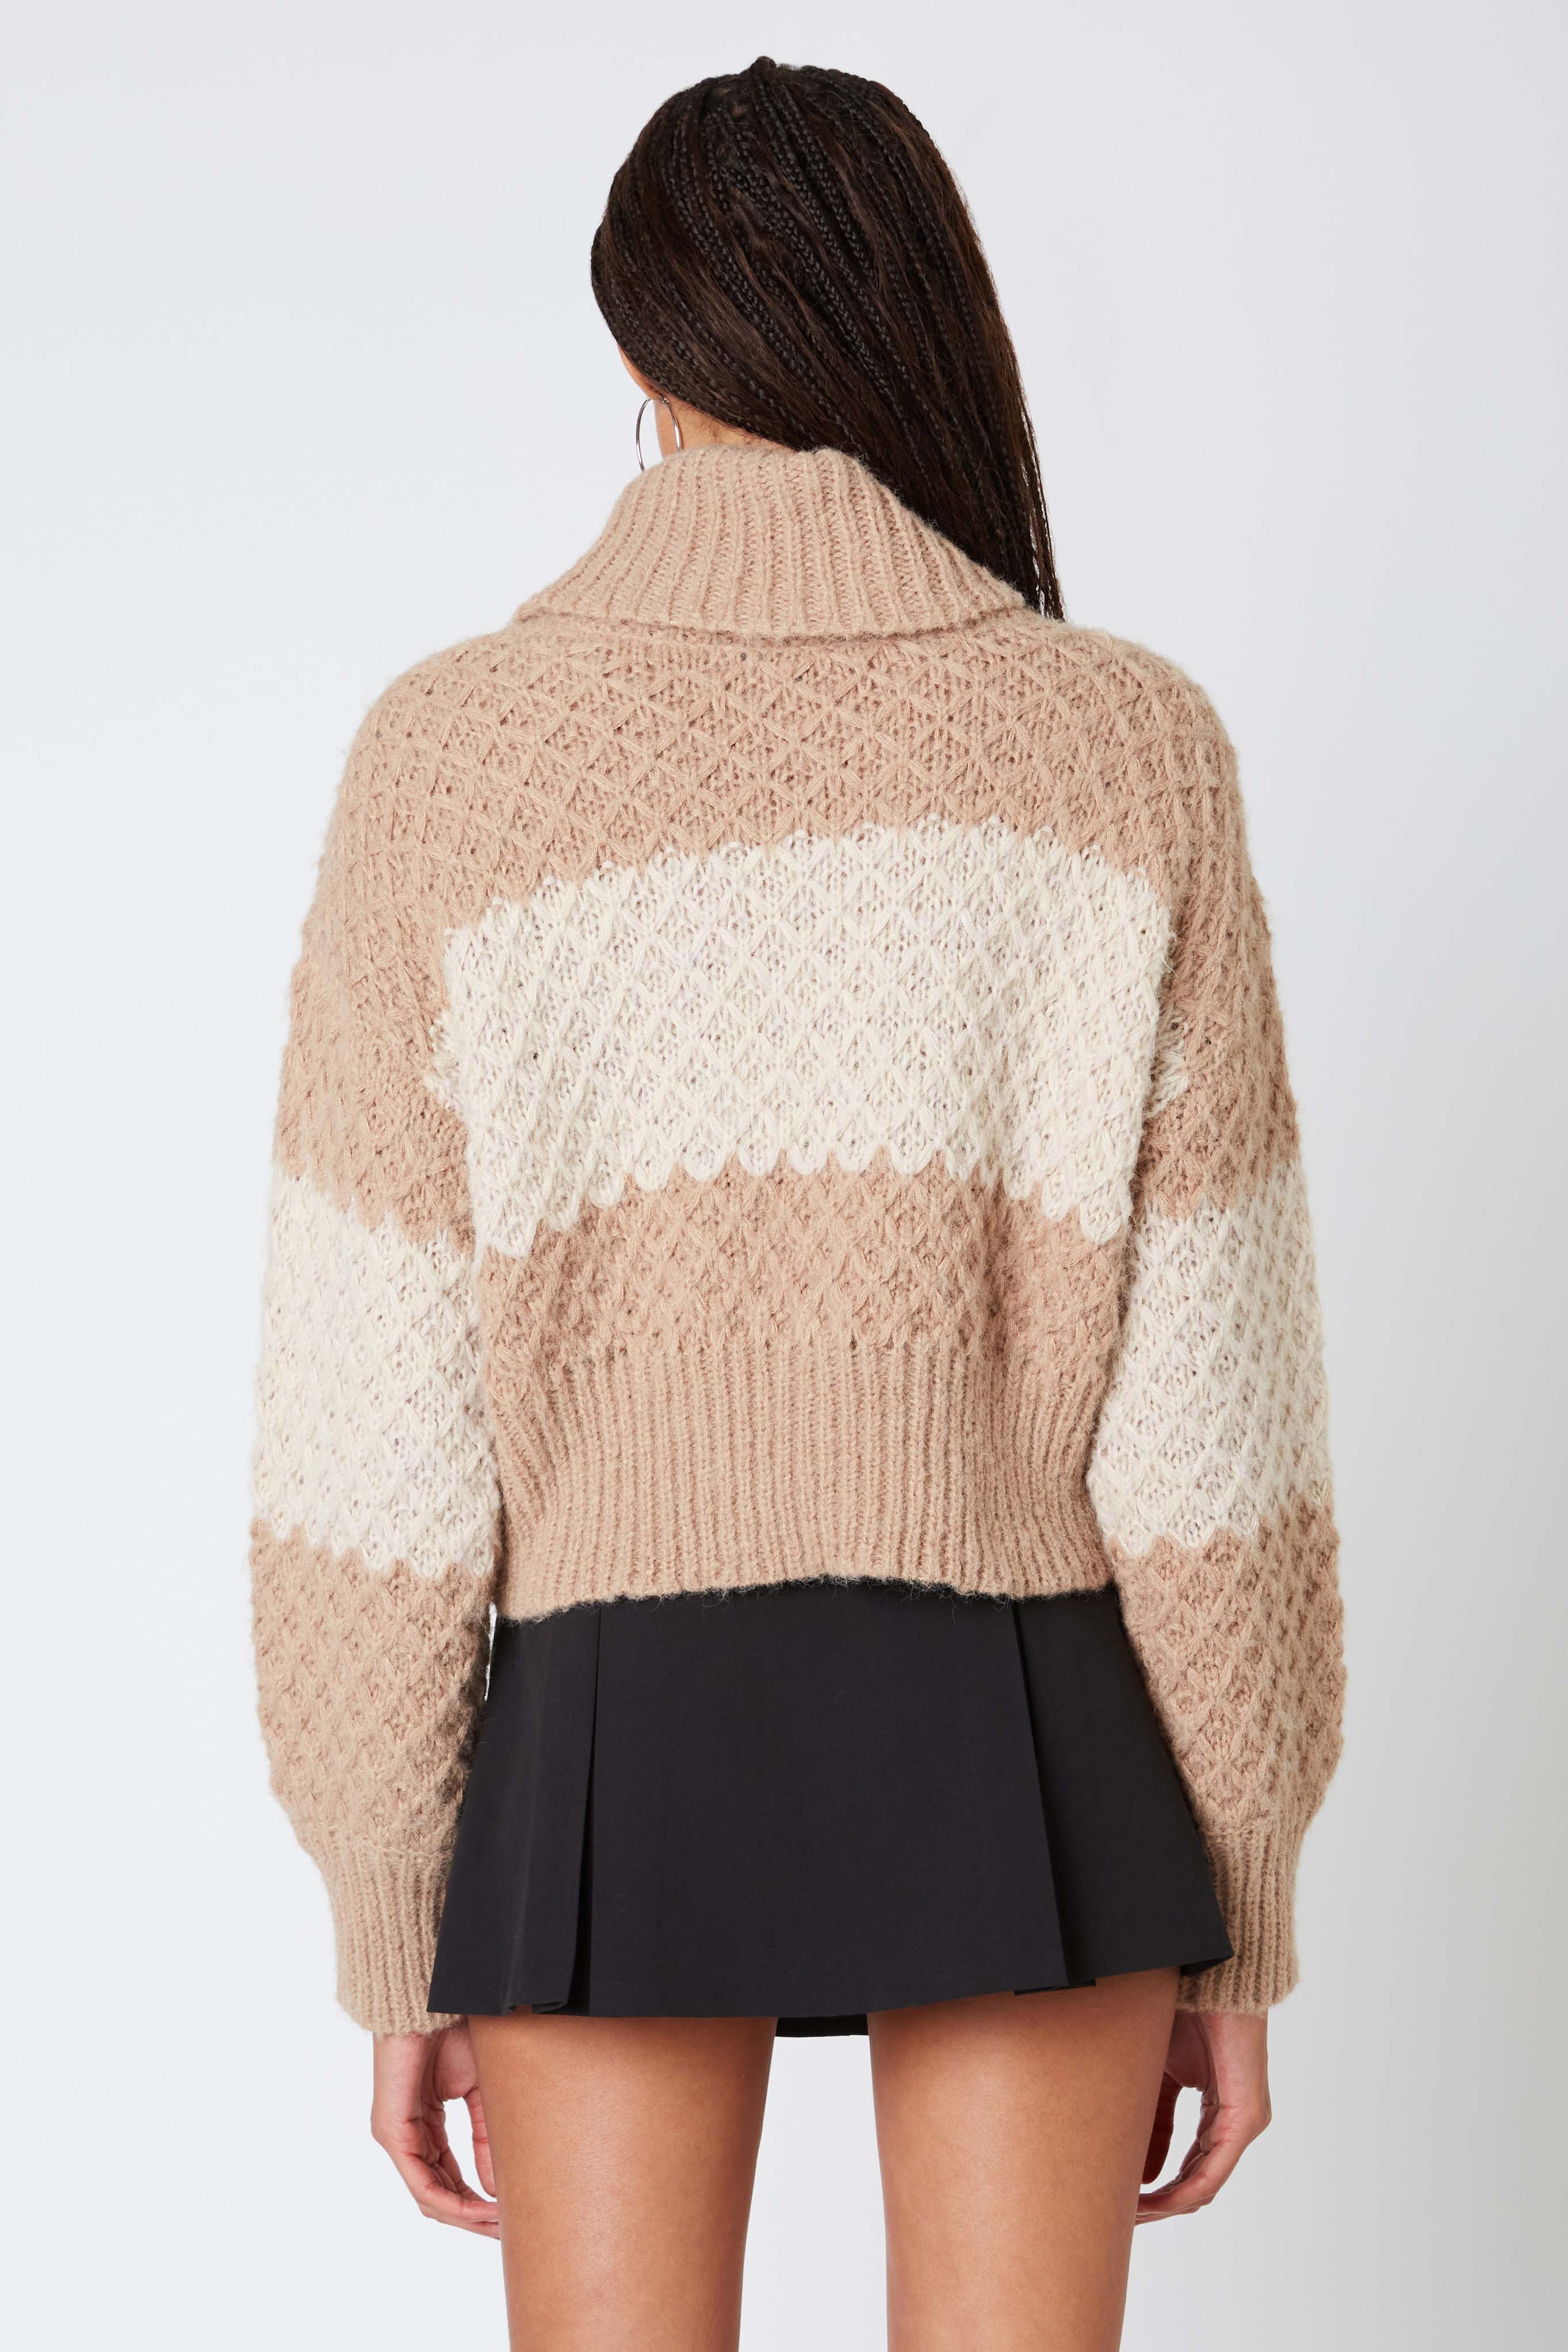 Turtleneck Pullover Sweater in Tan Back View